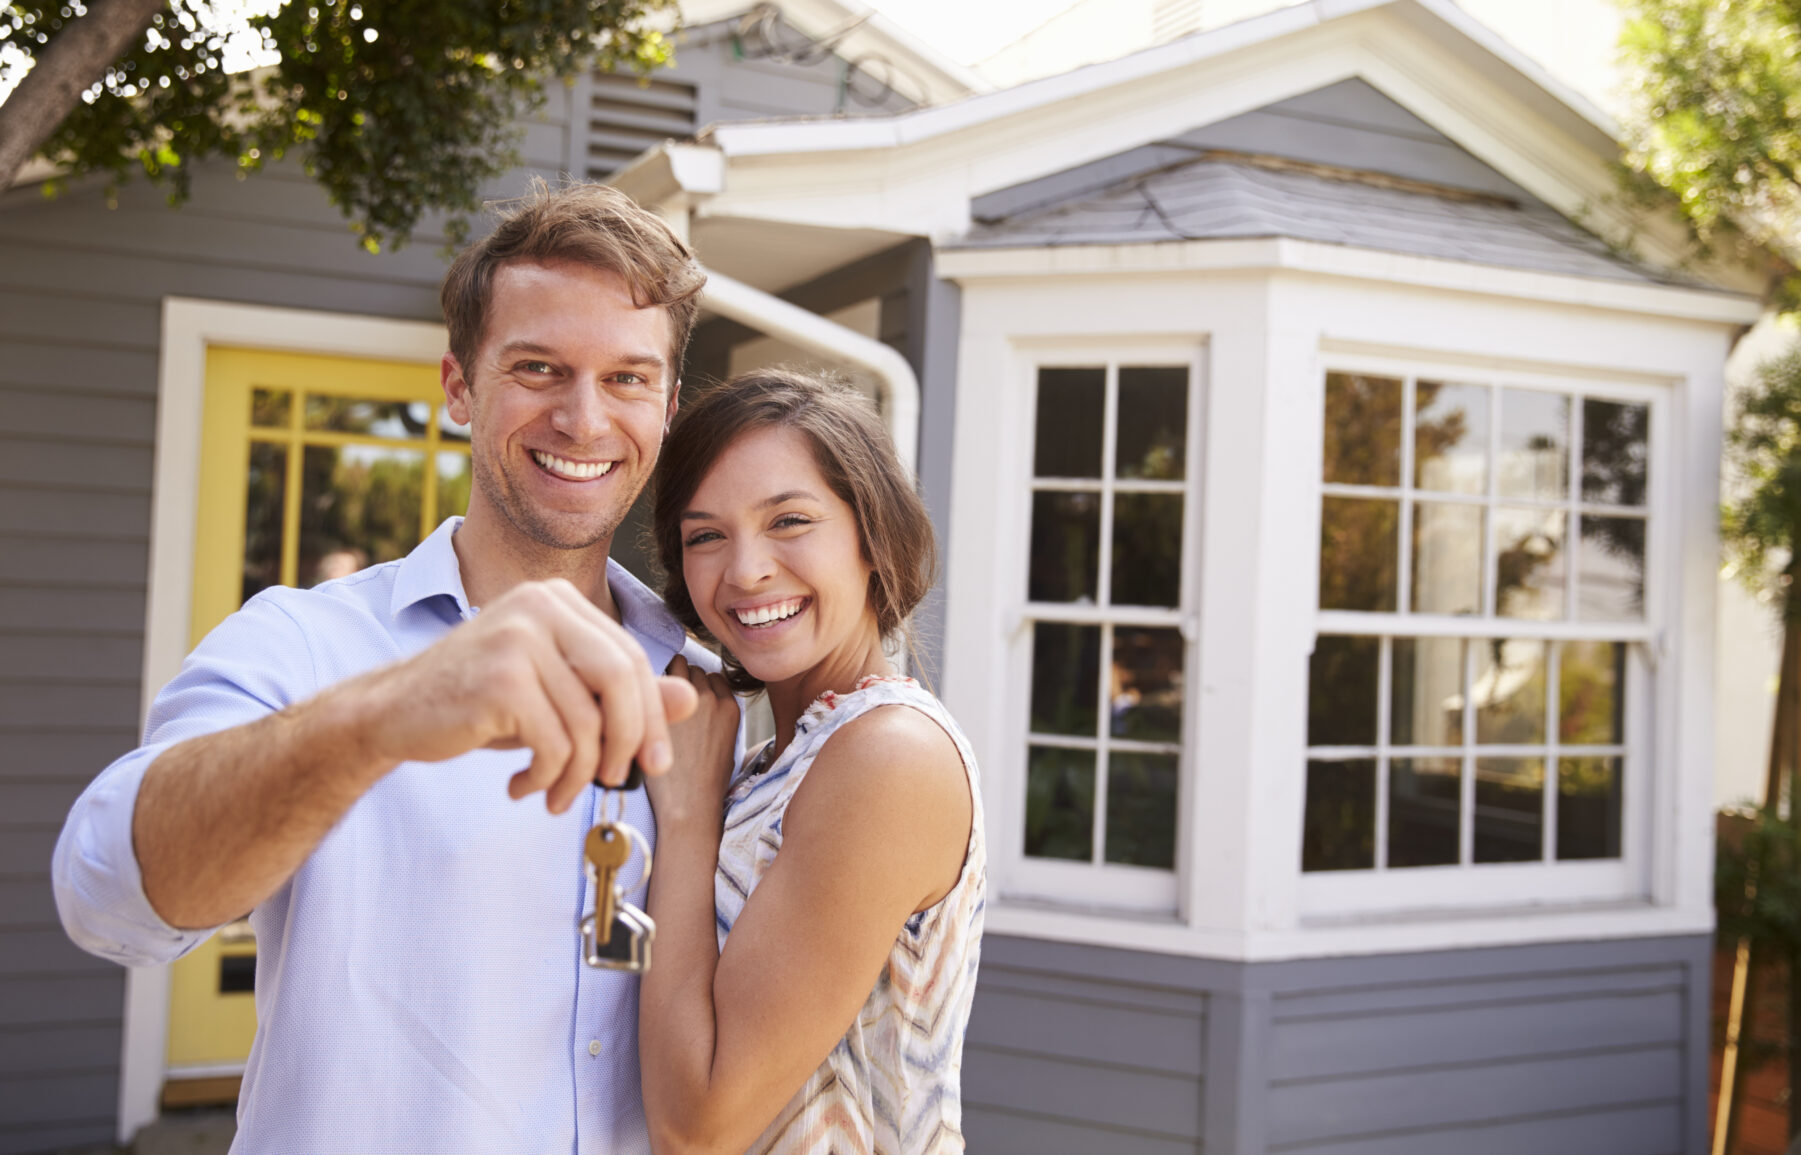 The Importance of Having A Home Buyer Checklist